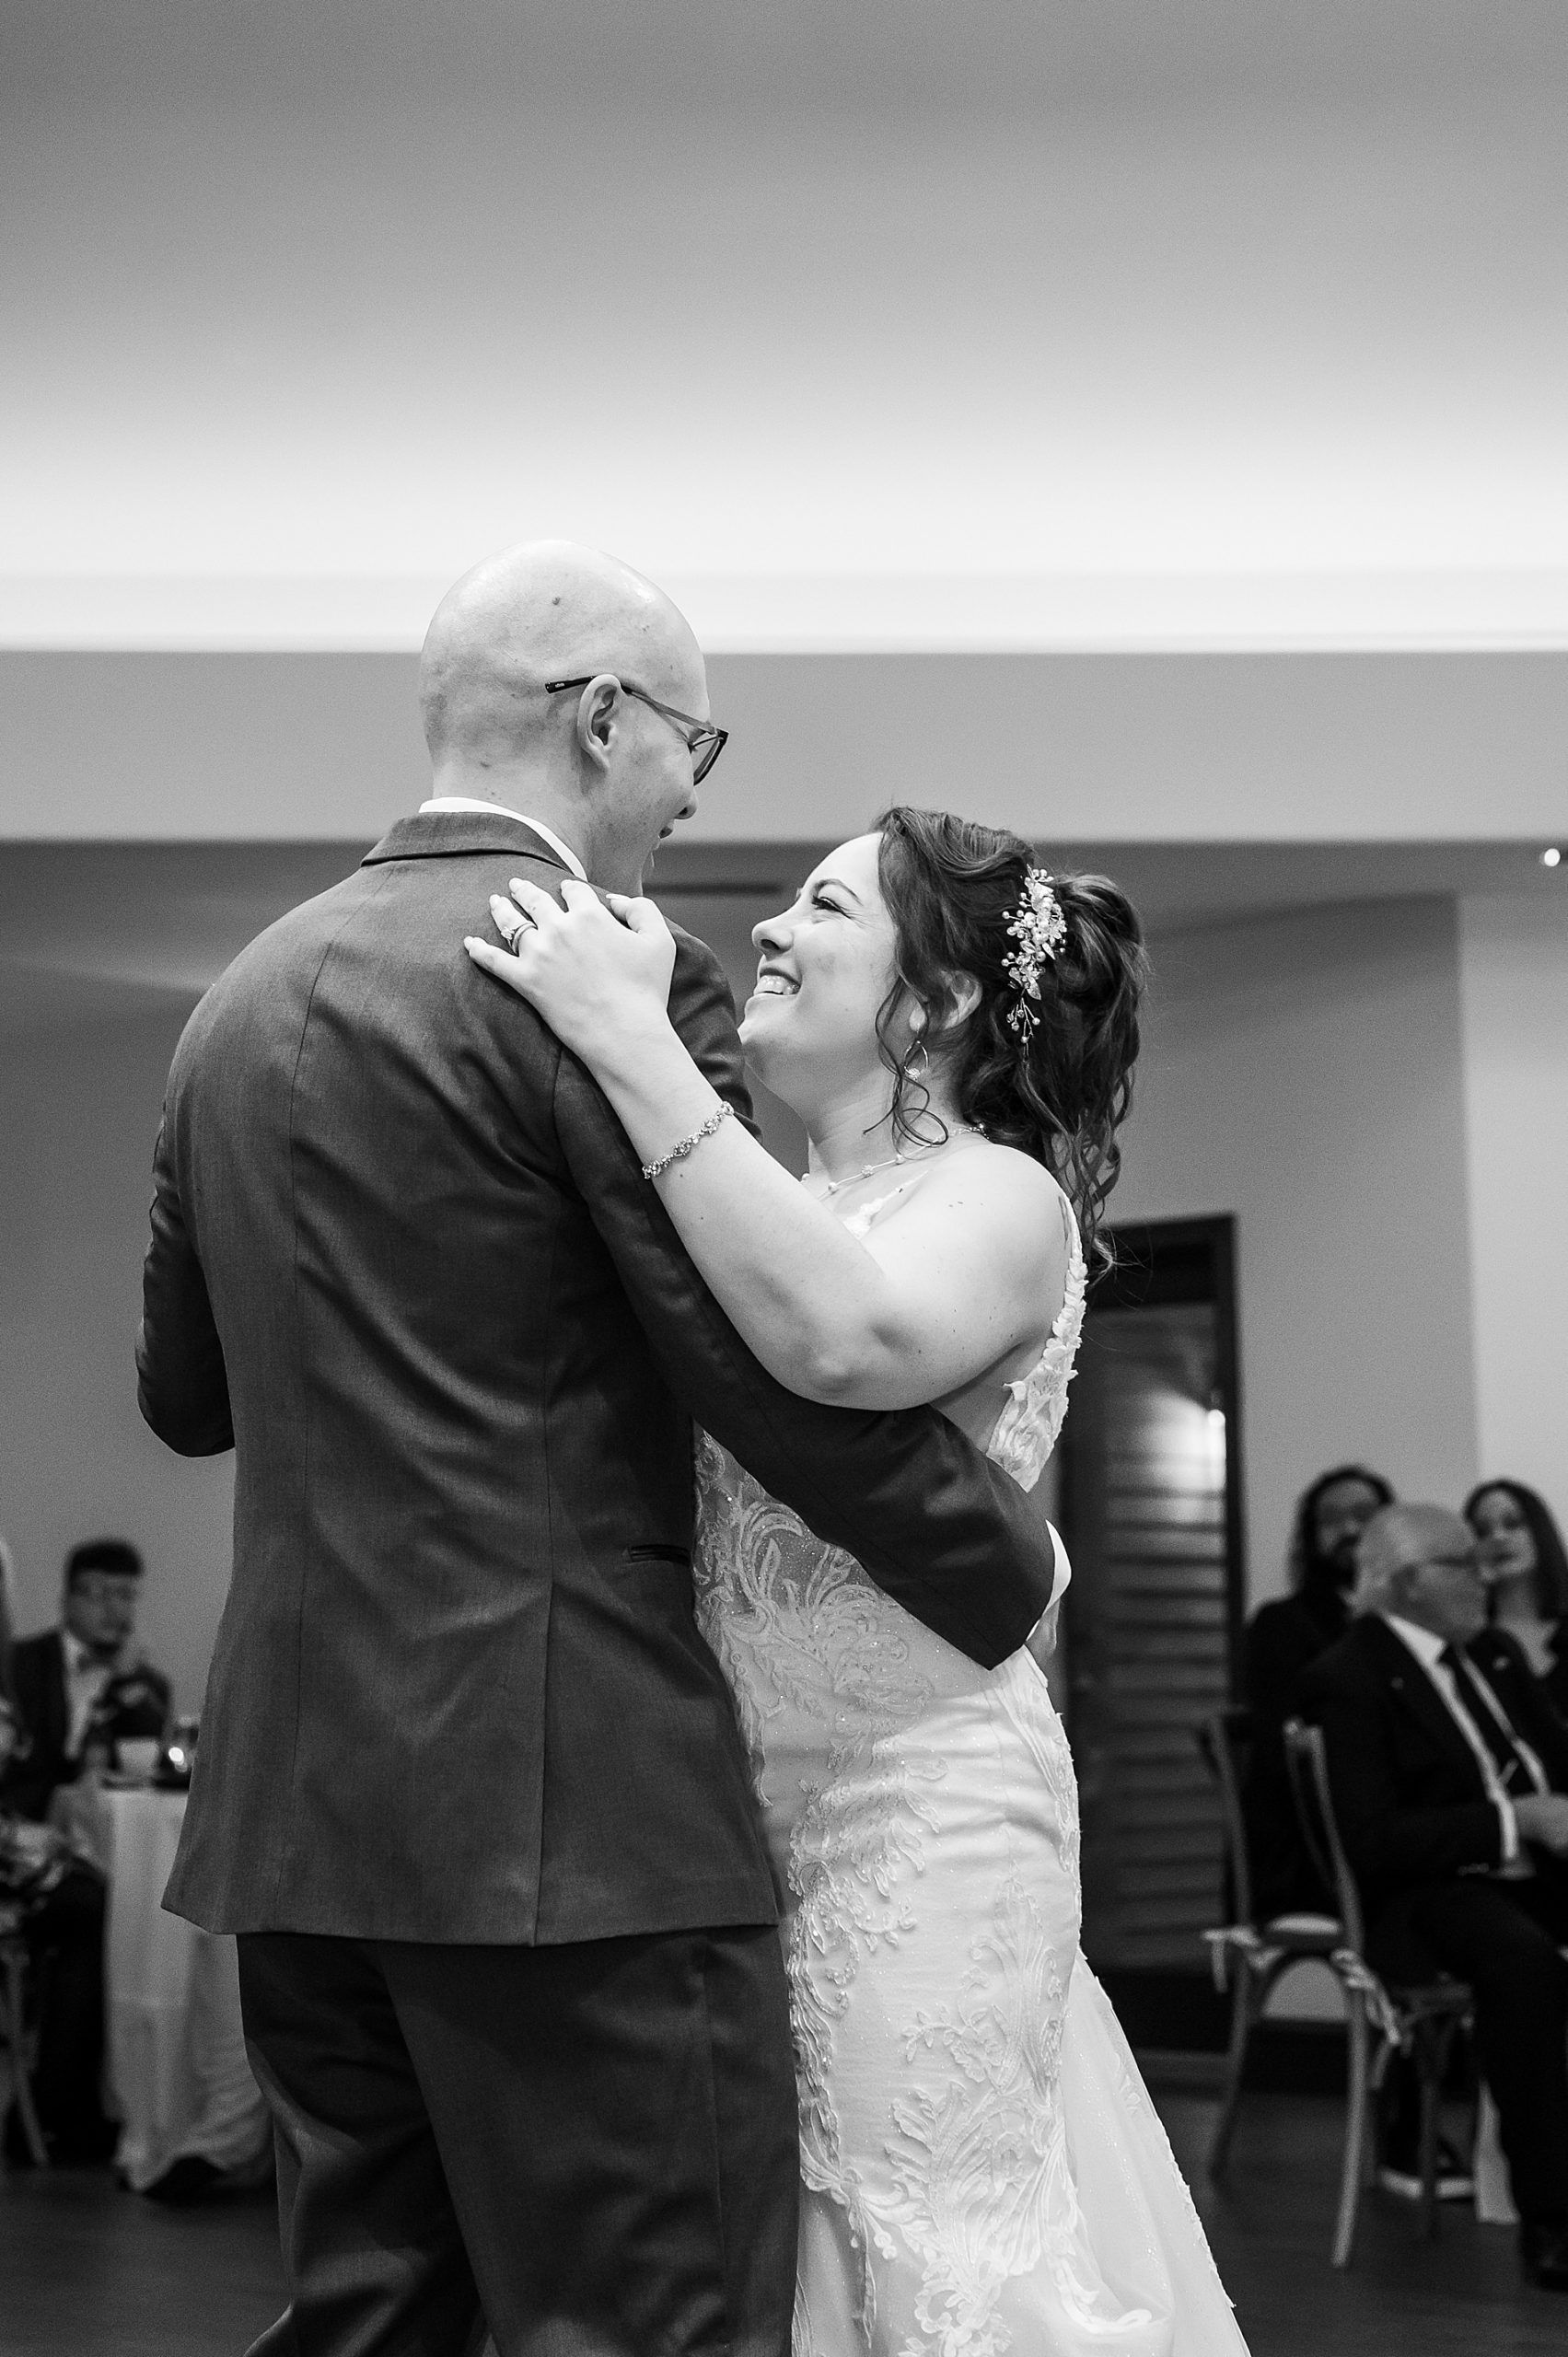 Southern NH Wedding photographer captures newlyweds sharing first dance